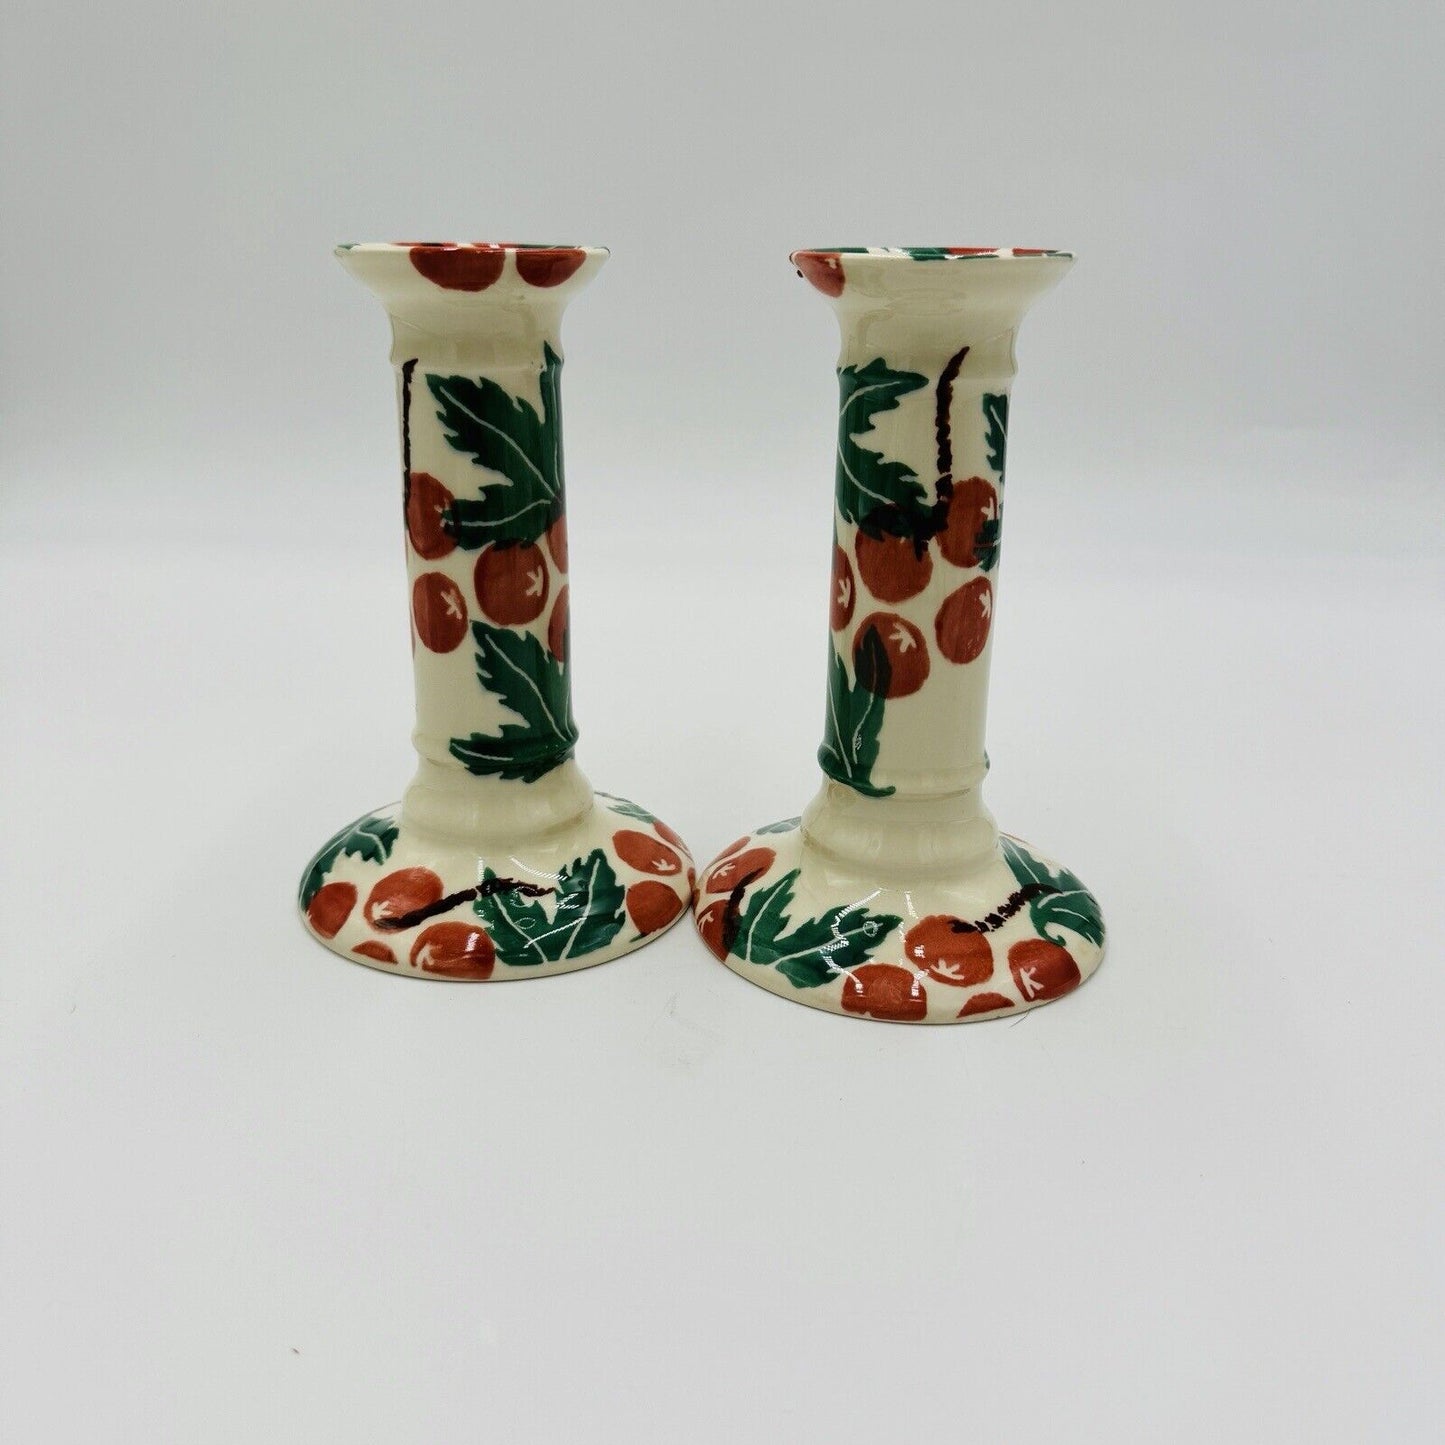 Antique Moorland Staffordshire England Hand Painted Candle Holders Ceramic 6”